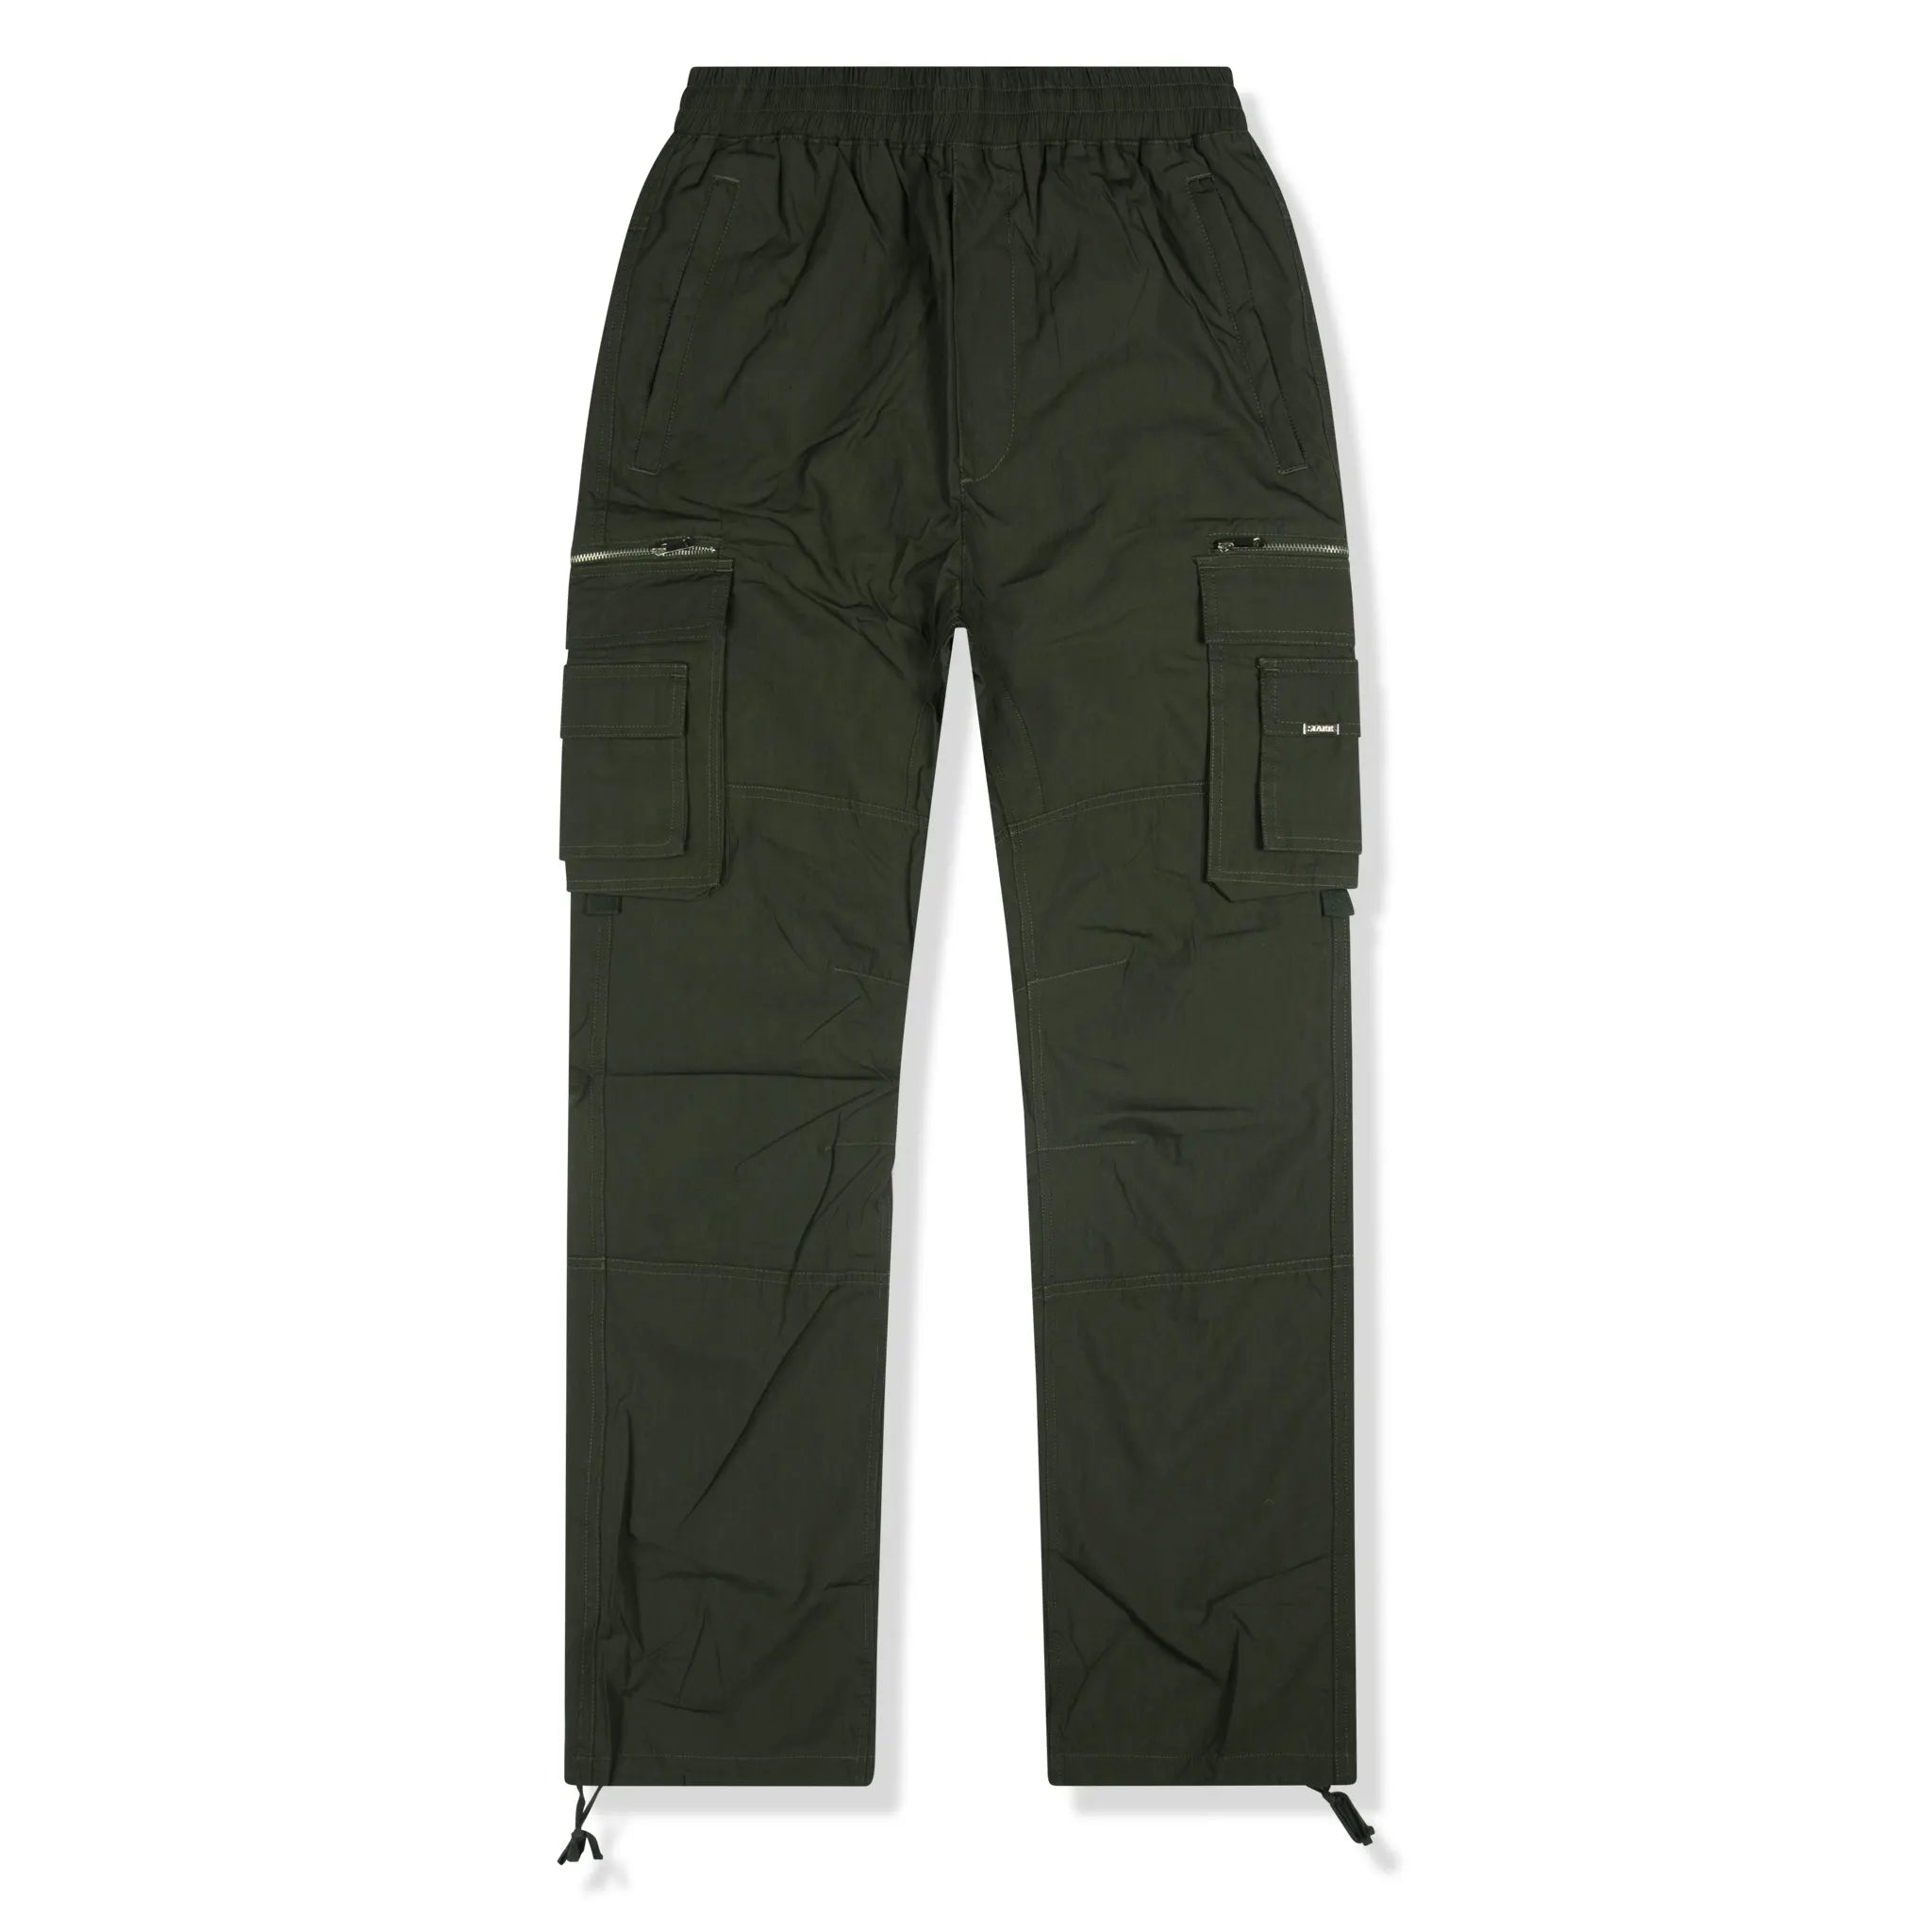 Front view of SIARR Military Dark Green Cargo Pants